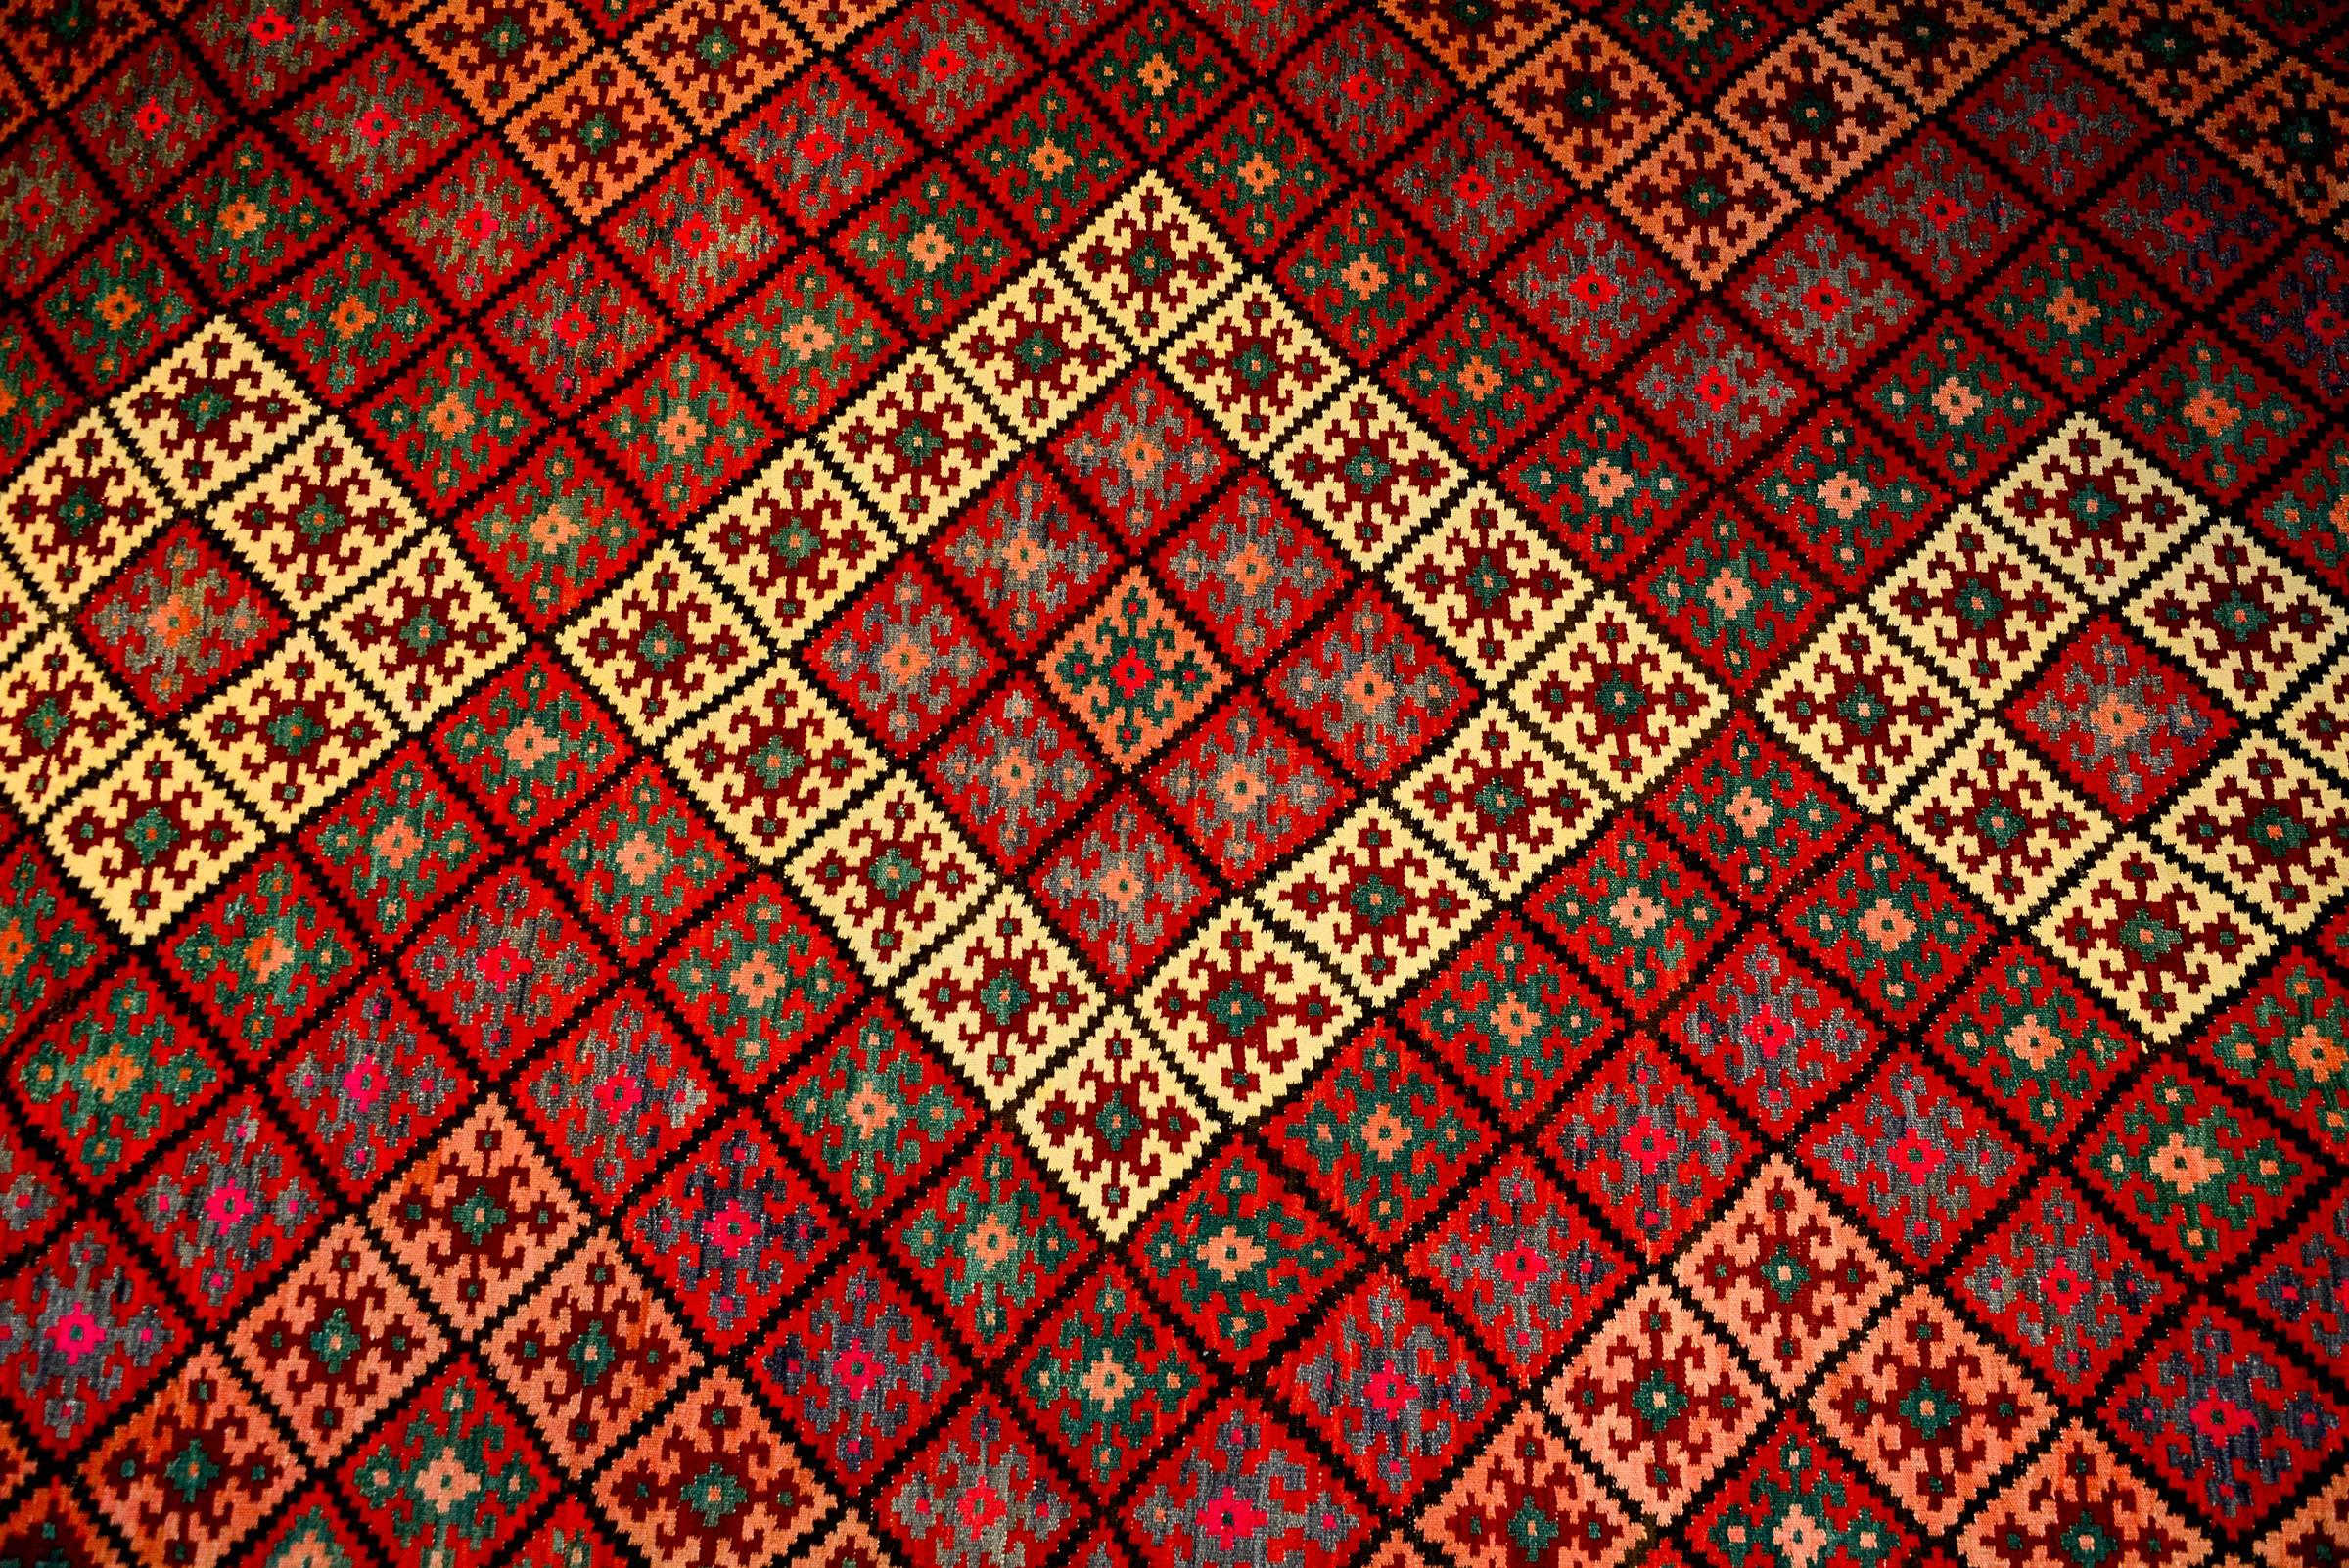 A mid-20h century Persian Saveh Kilim rug with a beautiful all-over diamond pattern of diamonds each with a geometric pattern, all woven in crimson, green, salmon, and grey vegetable dyed wool.